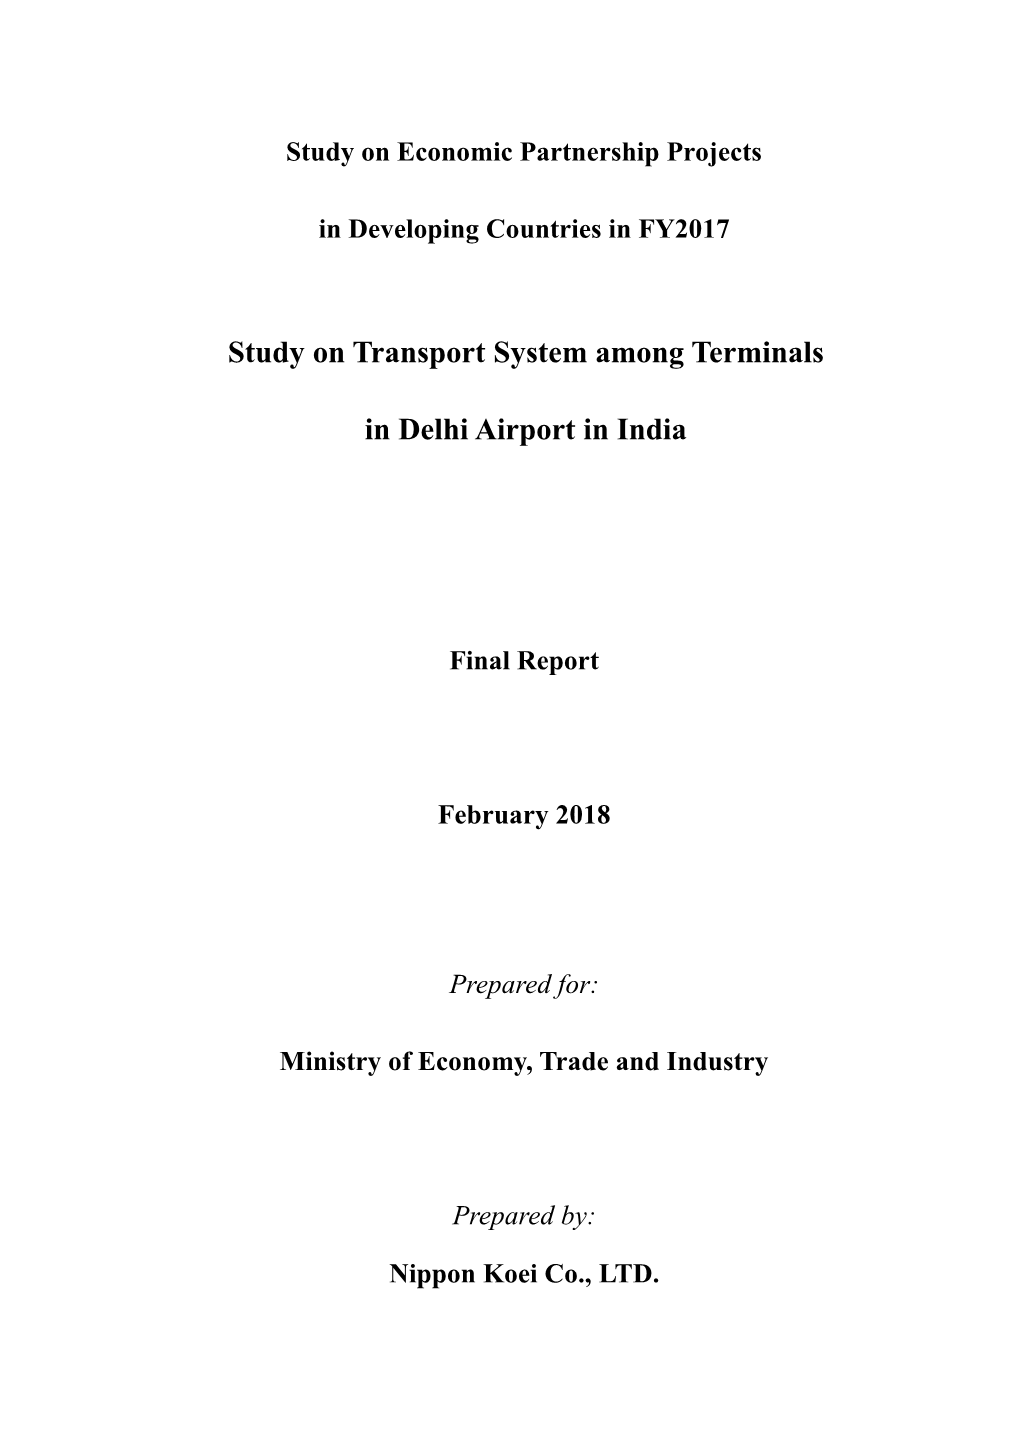 Study on Transport System Among Terminals in Delhi Airport in India